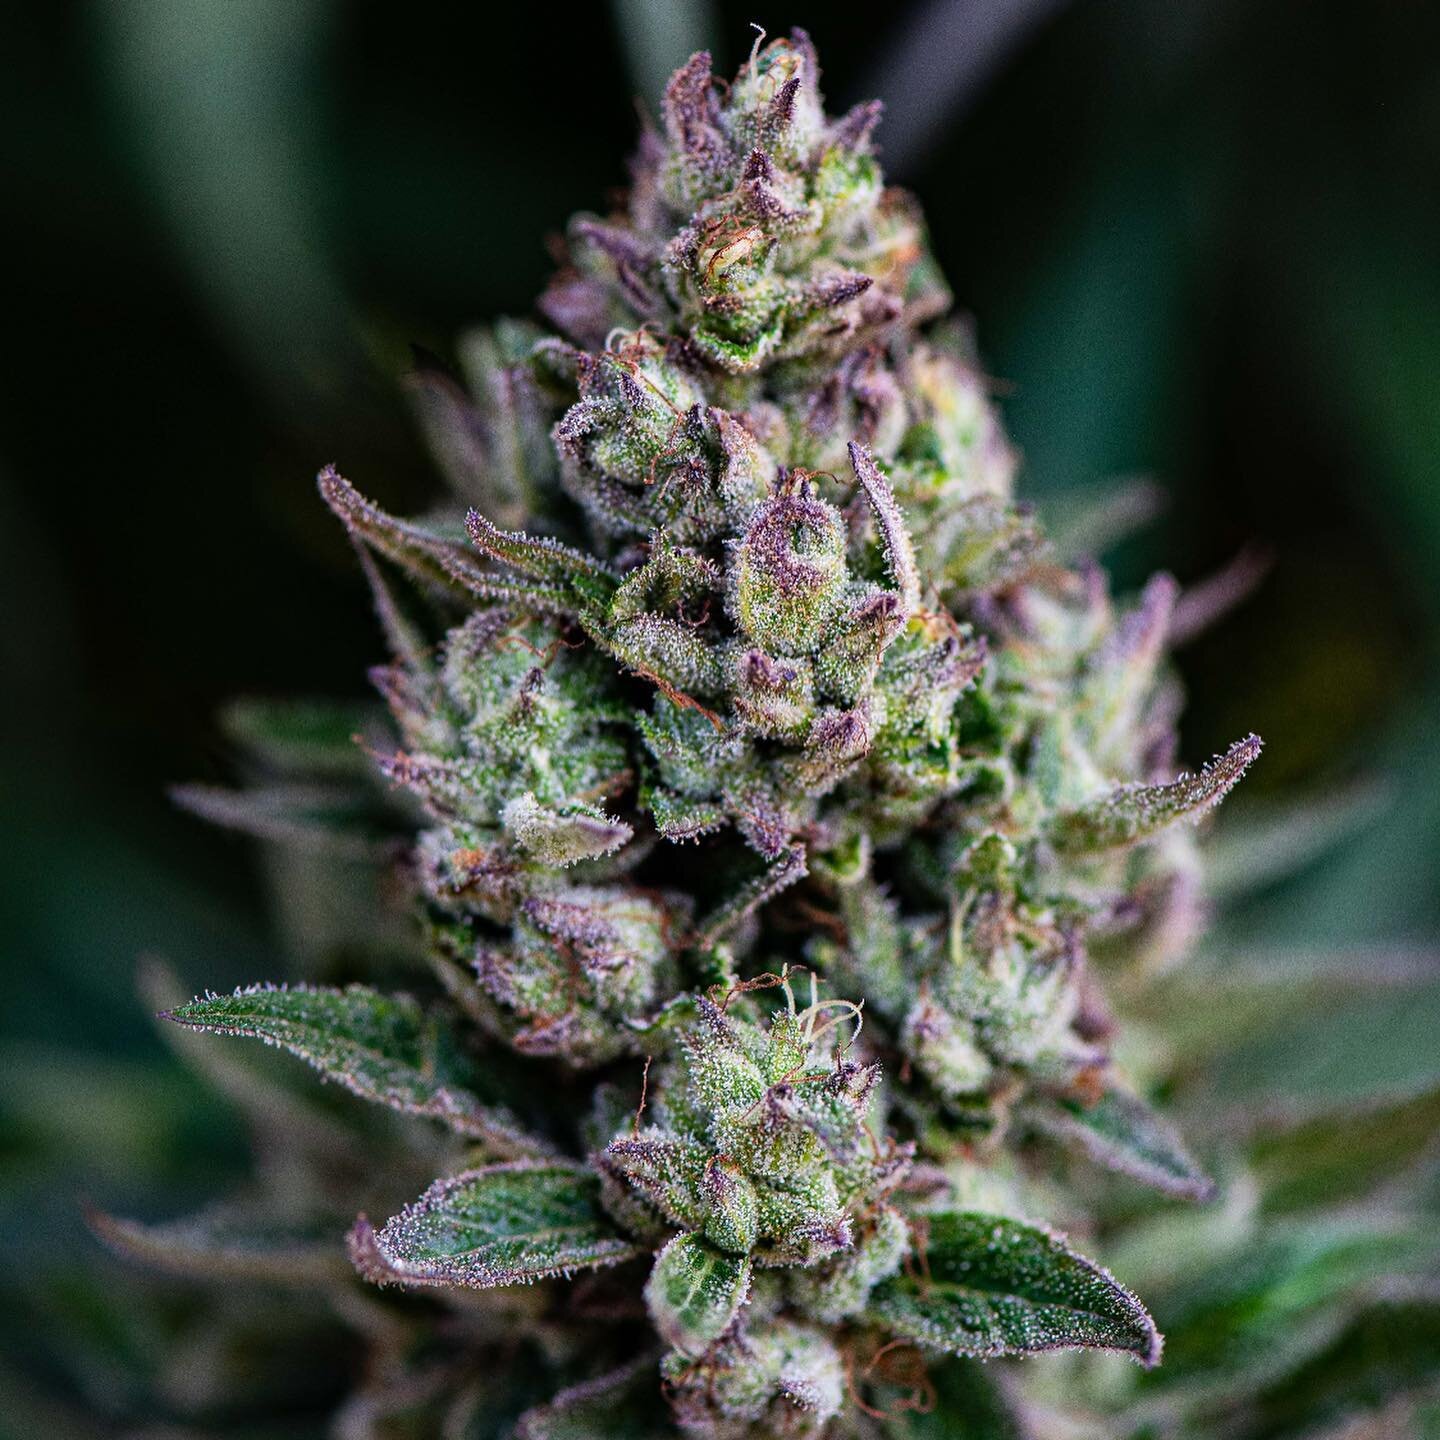 Banana 🍌Punch🥊  outdoor. Sonoma county grown on Joy Ridge. Thanks to @terpinatoroil for the shot! #cannabiscommunity #cannabis #thc #weed #weedporn #420 #california #norcal #indica #sativa #dabs #cultivate #grow #cannabisculture #weedstagram #hight